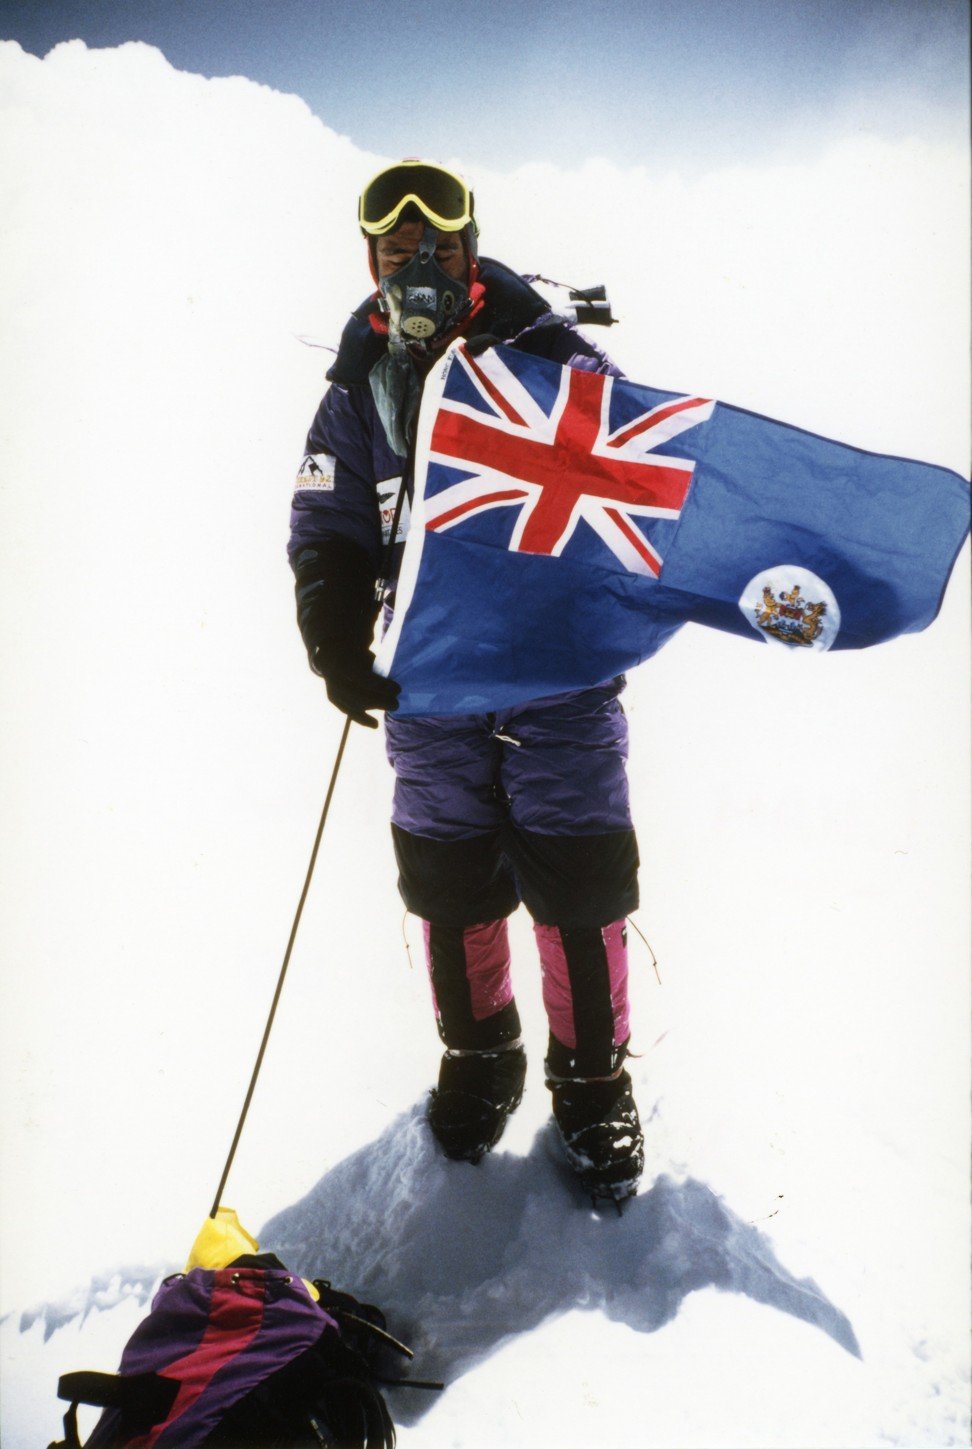 Cham plants Hong Kong’s flag at the peak of Mount Everest on 12 May, 1992.